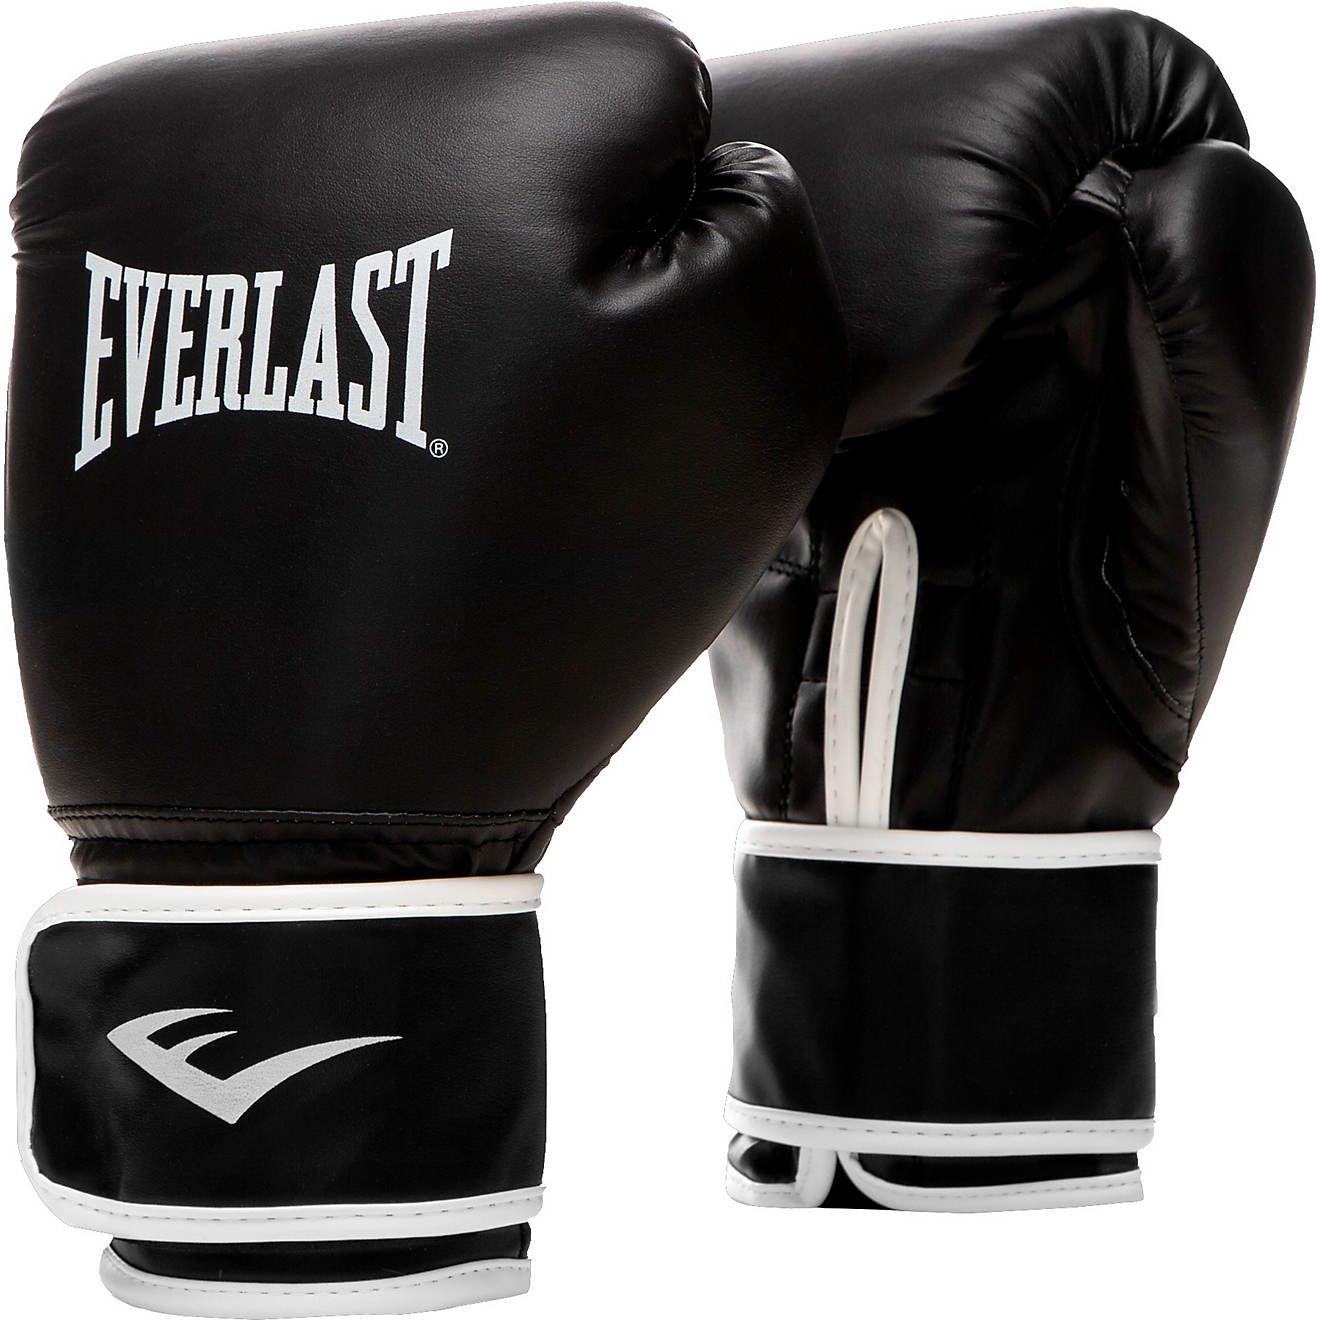 Everlast Core2 Training Boxing Gloves | Academy | Academy Sports + Outdoors